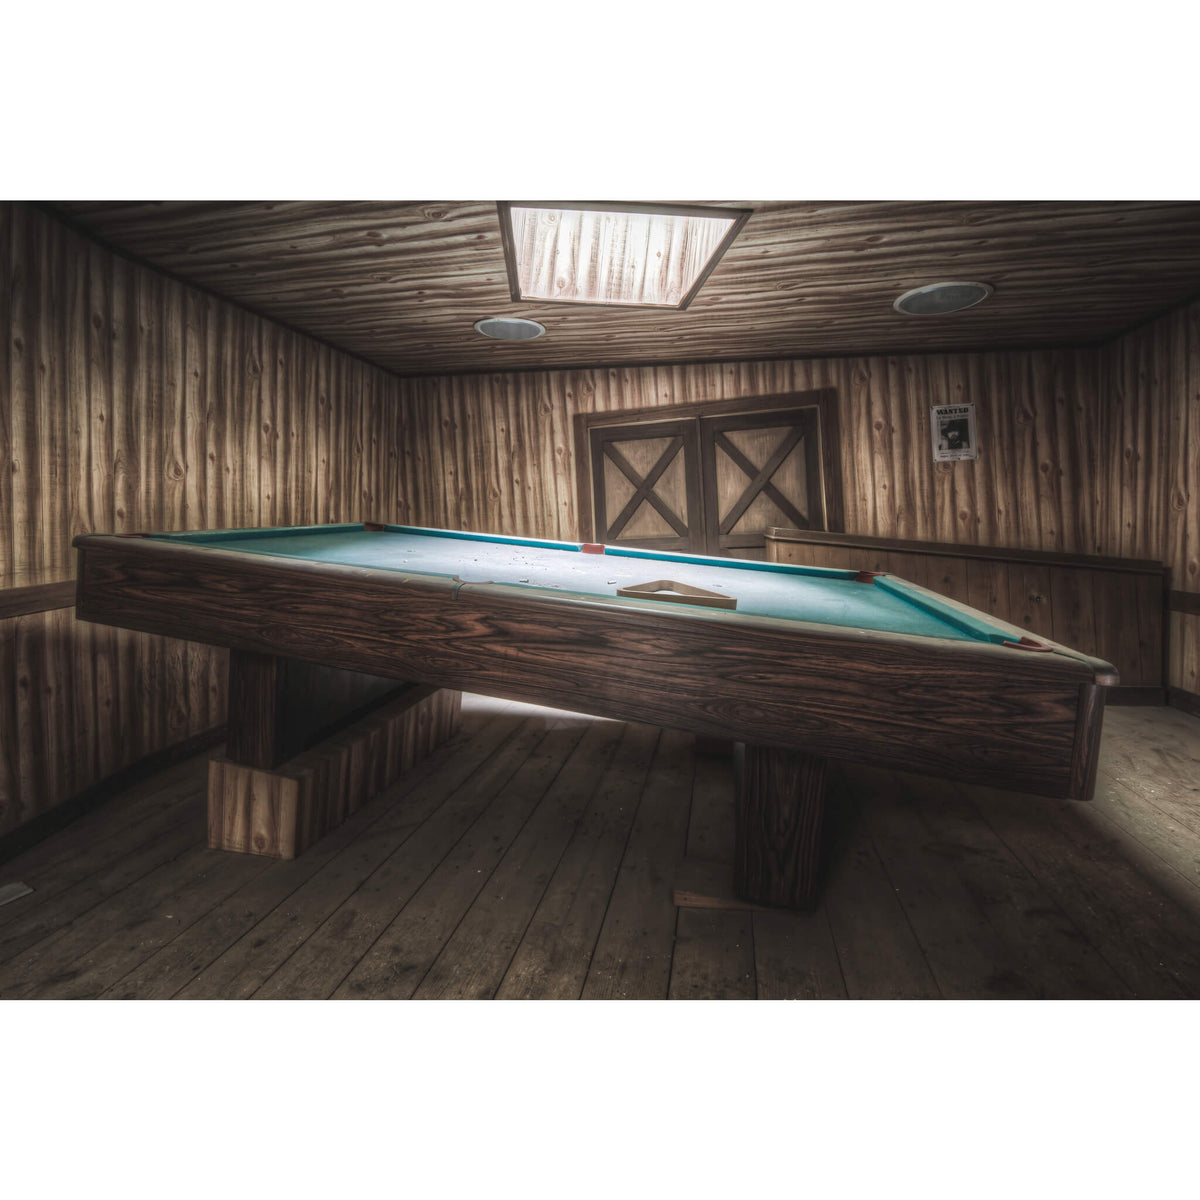 Pool Table | Western Village Fine Art Print - Lost Collective Shop